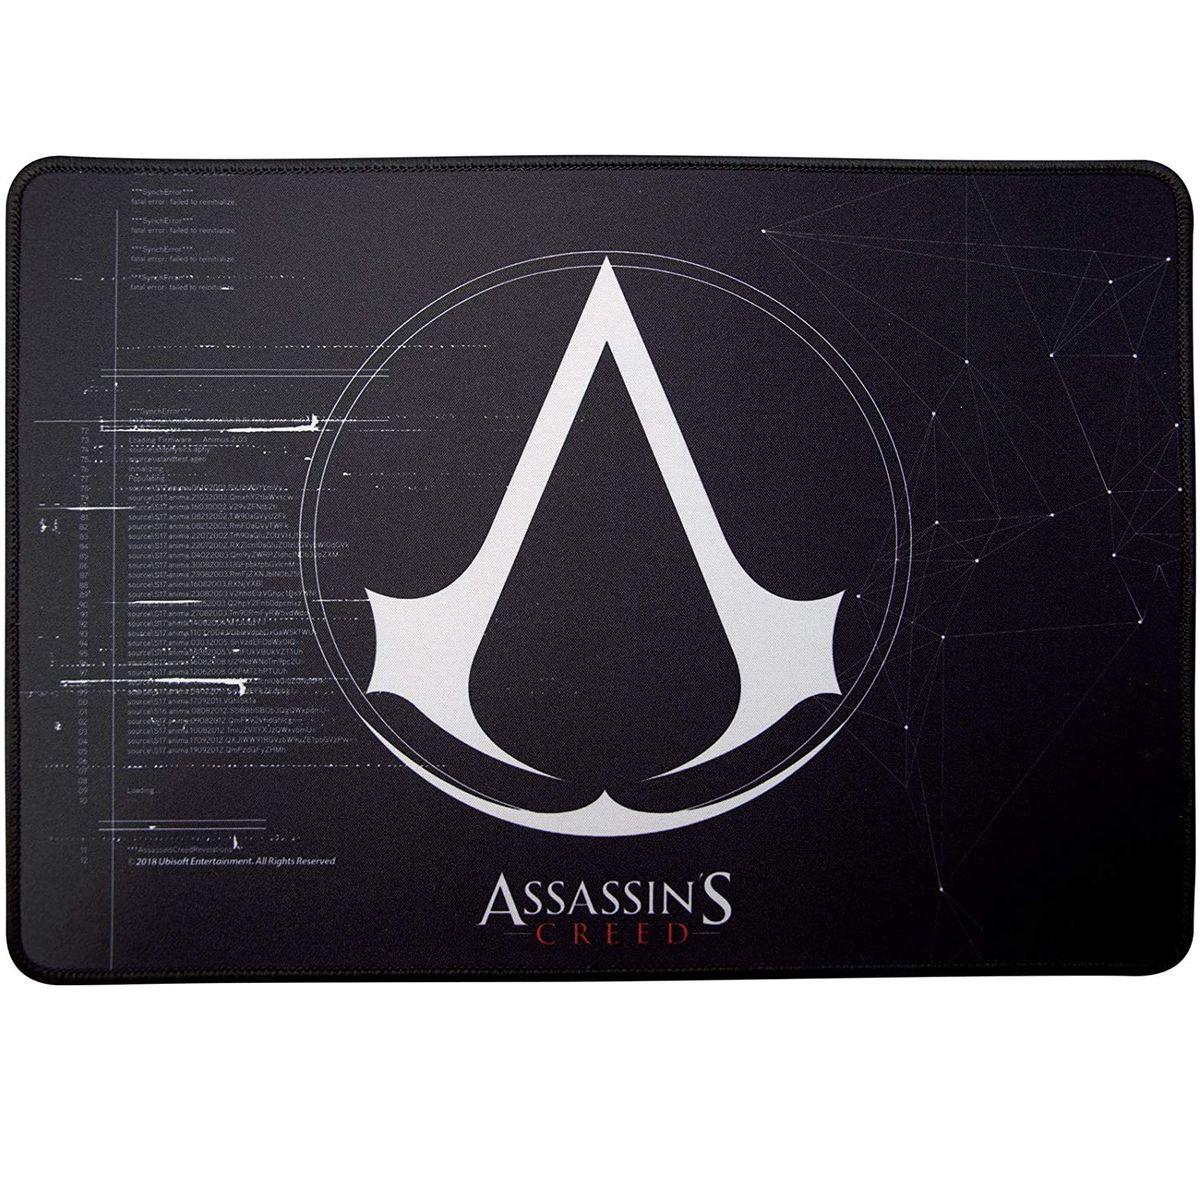 ABYSTYLE Assassin\'s mm) mm Mauspad (0 Creed x Gaming 0 Mauspad